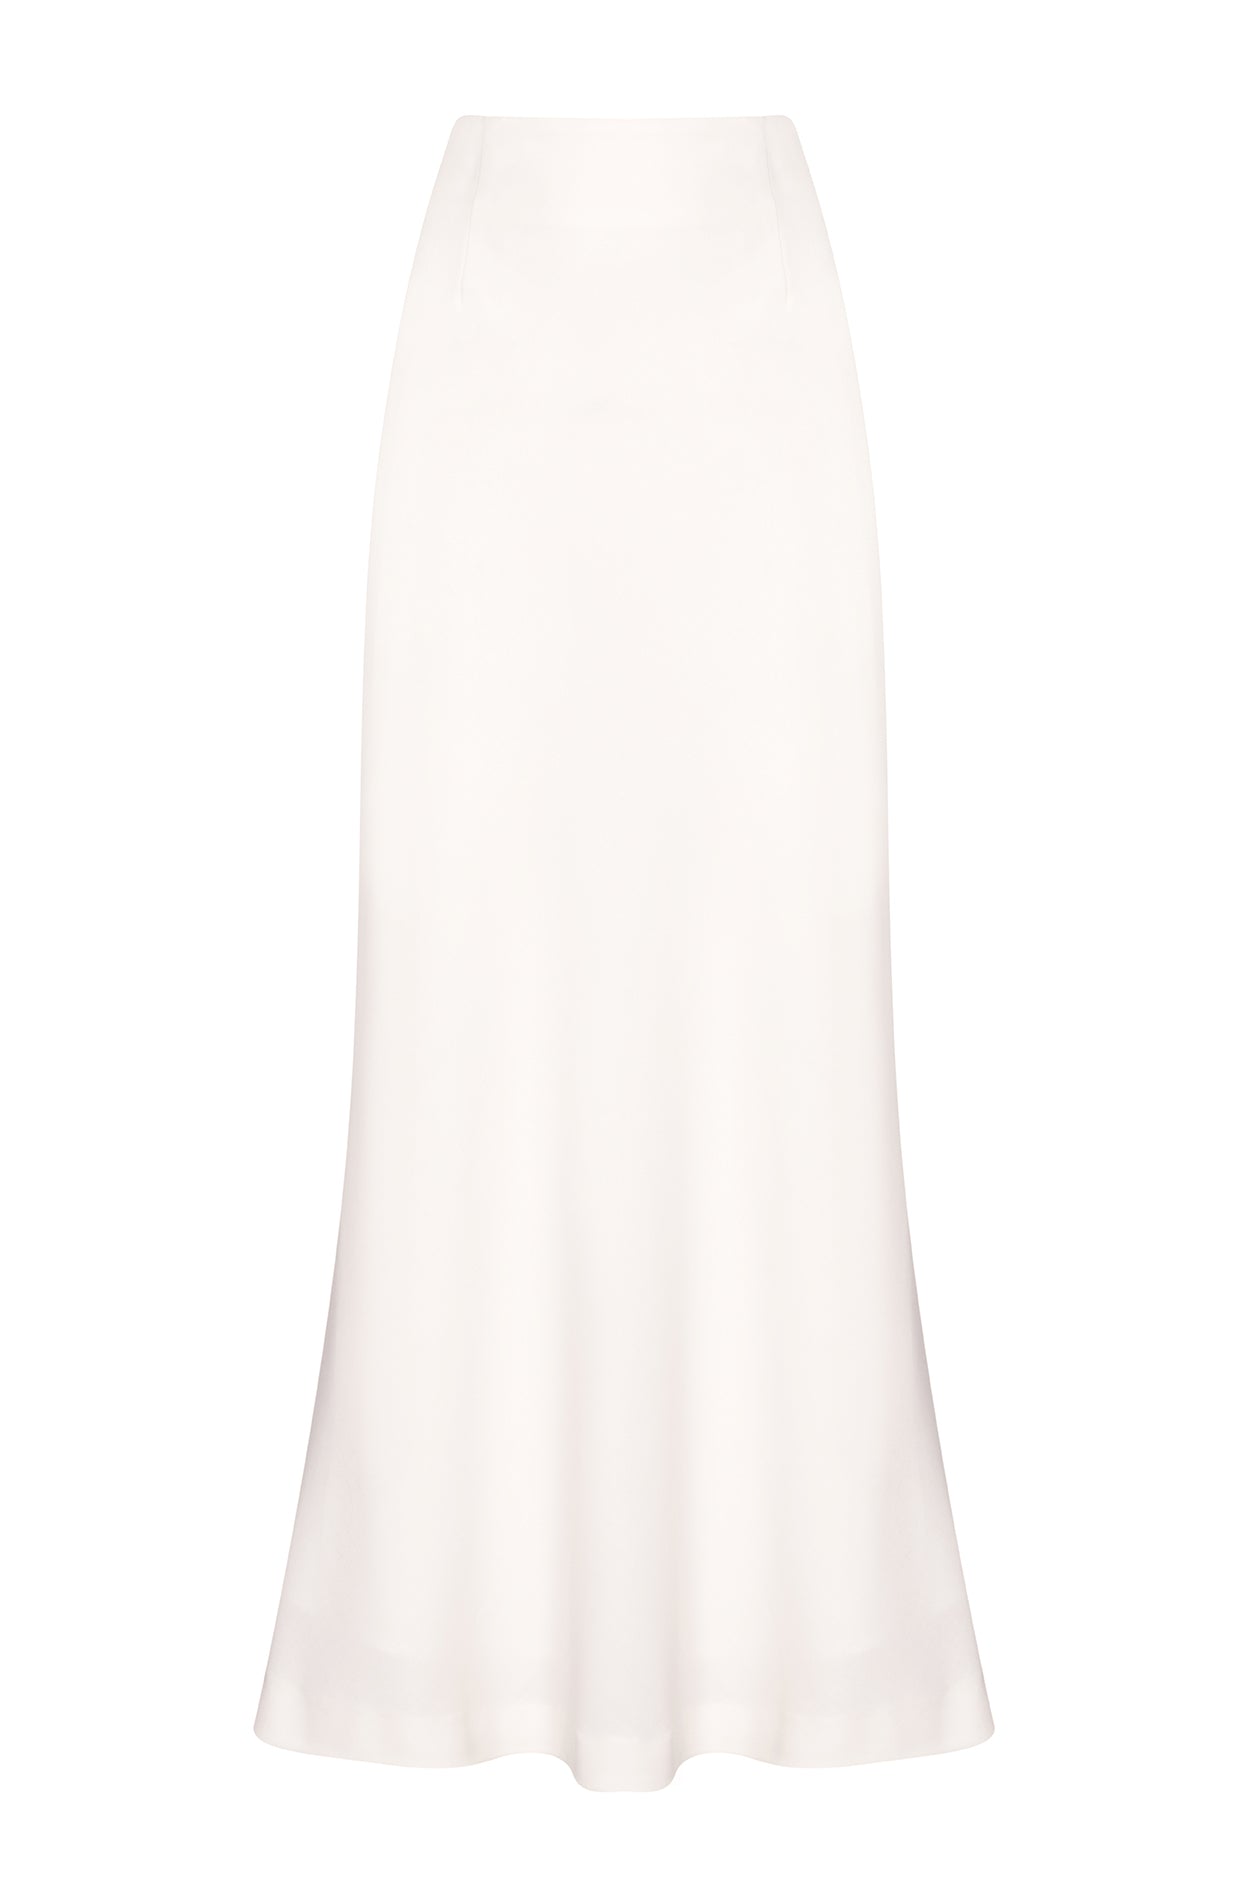 Long Bias Cut Summer Skirt in Ivory Crepe Cady - Maxine